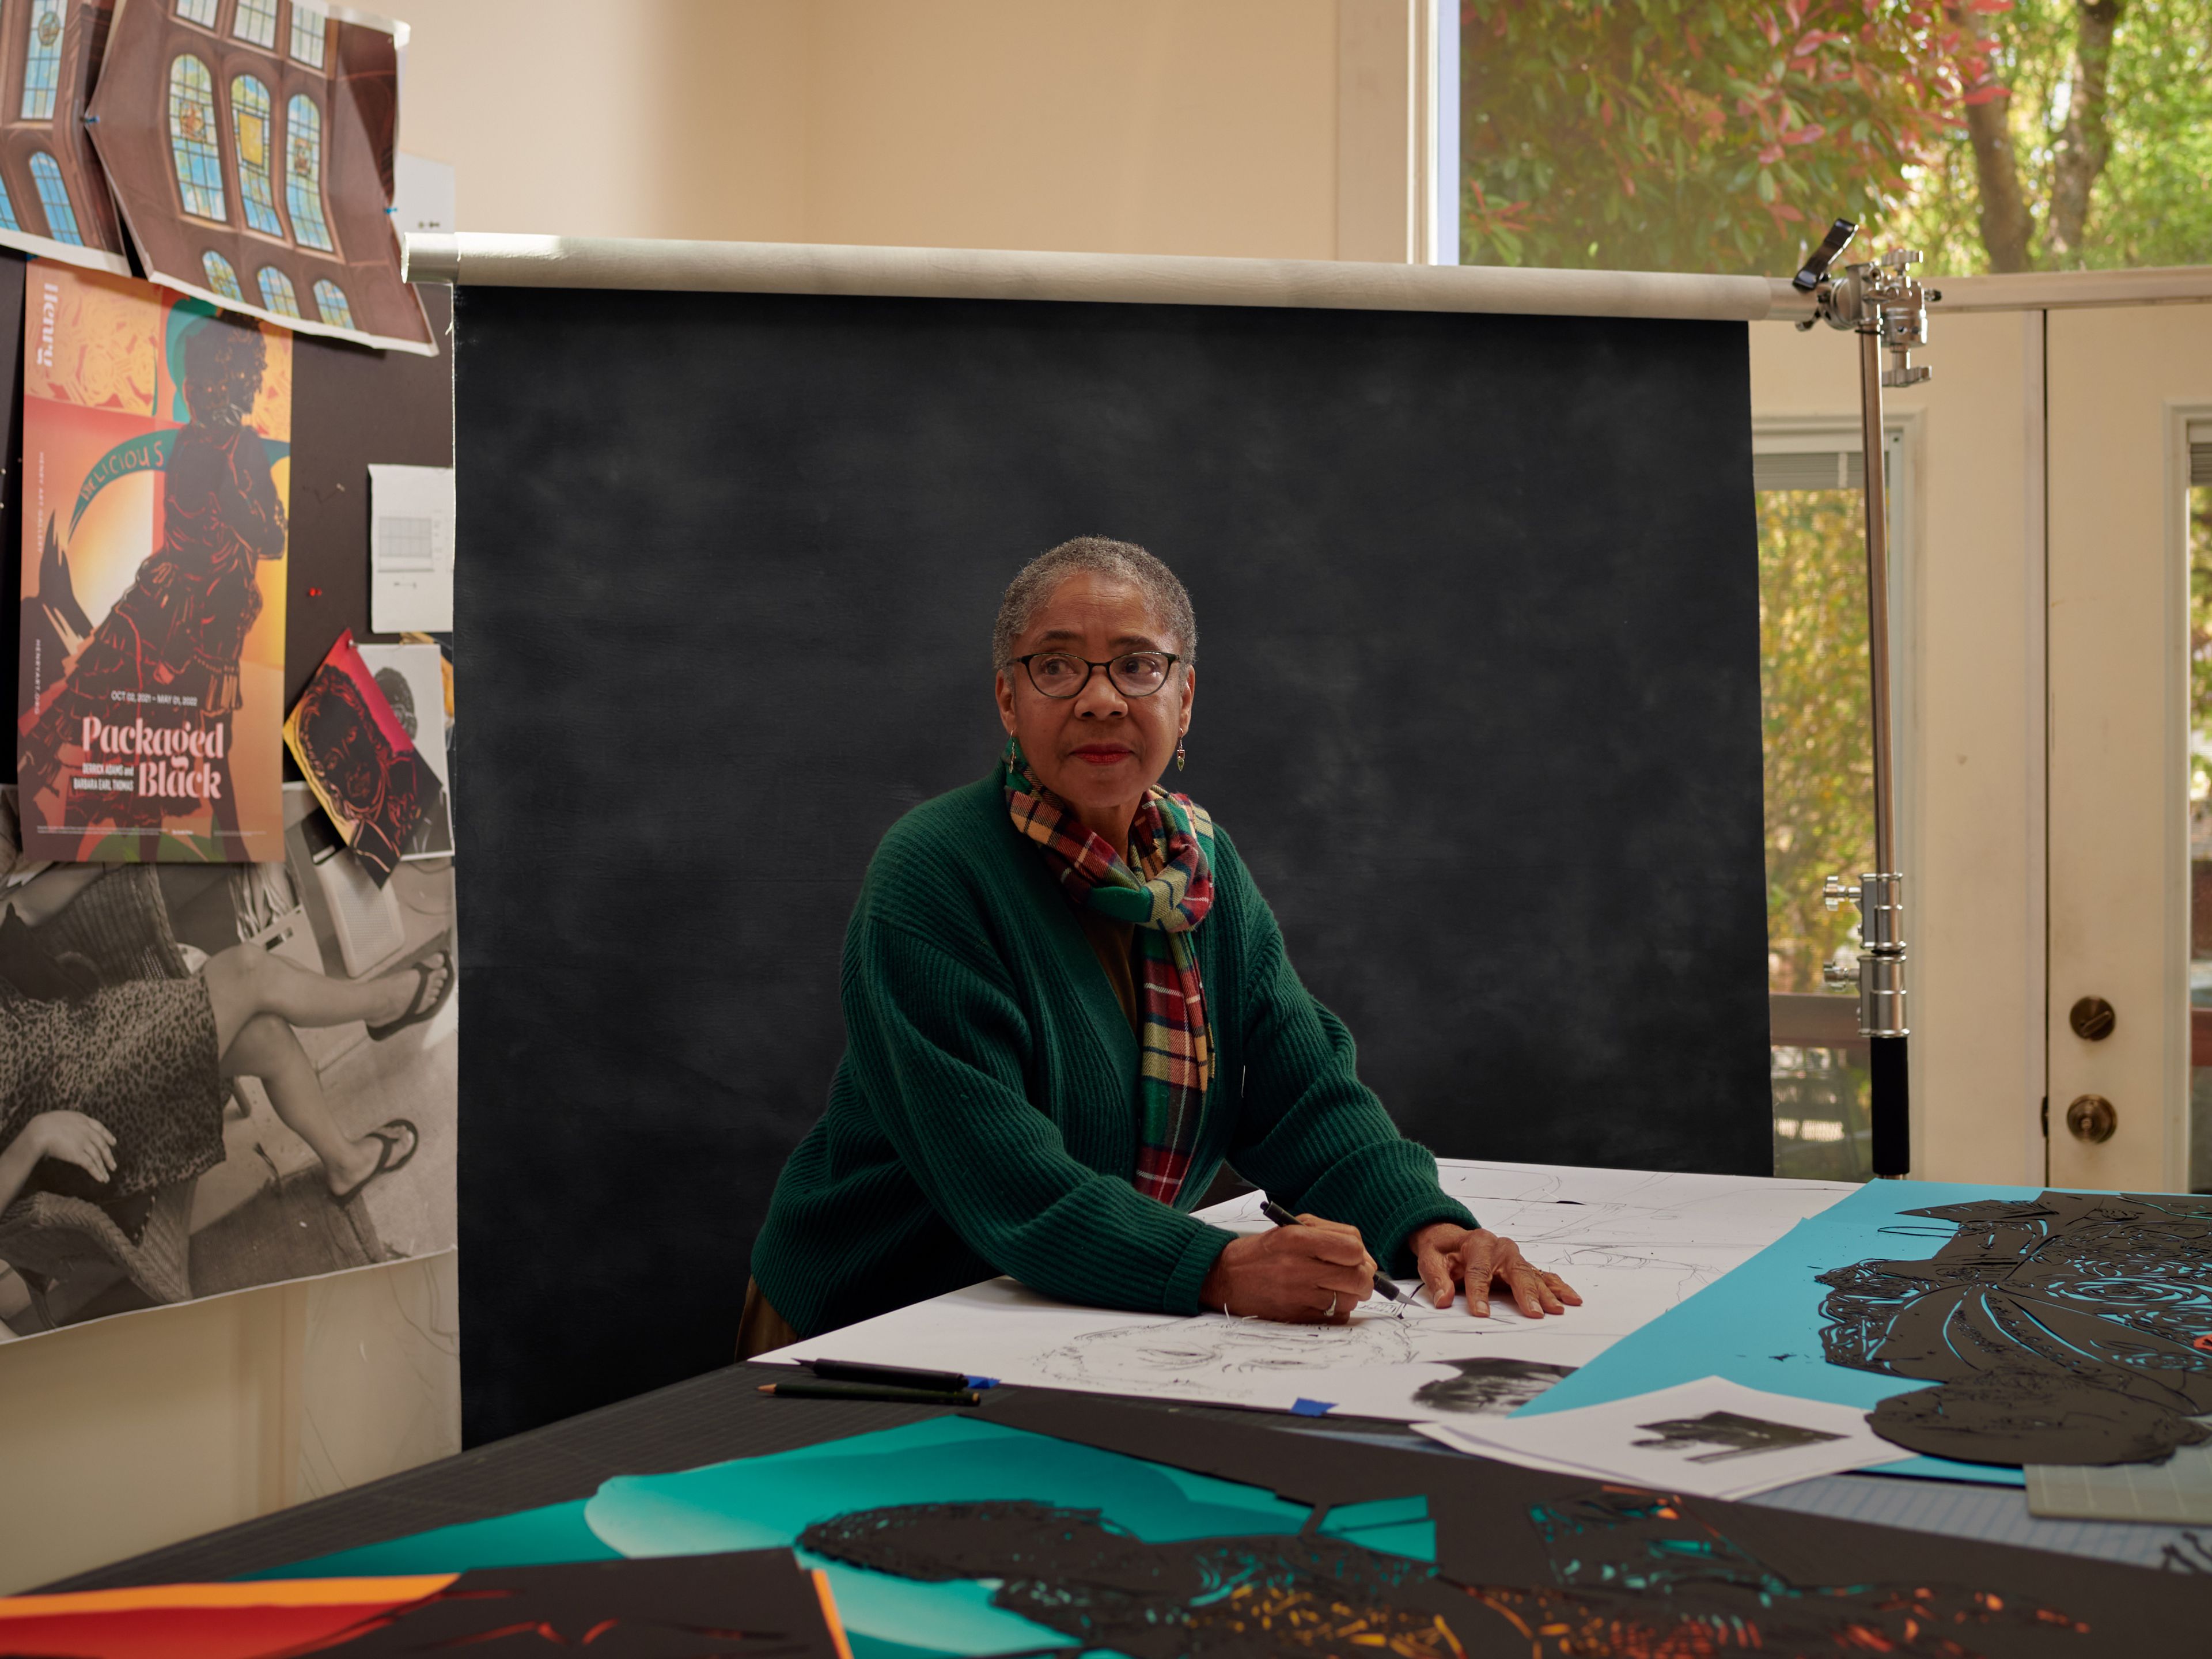 Person in front of a black backdrop in a room with a window to the right. In front of her is a table featuring paper on which she is drawing. It also features colorful papercut artwork.